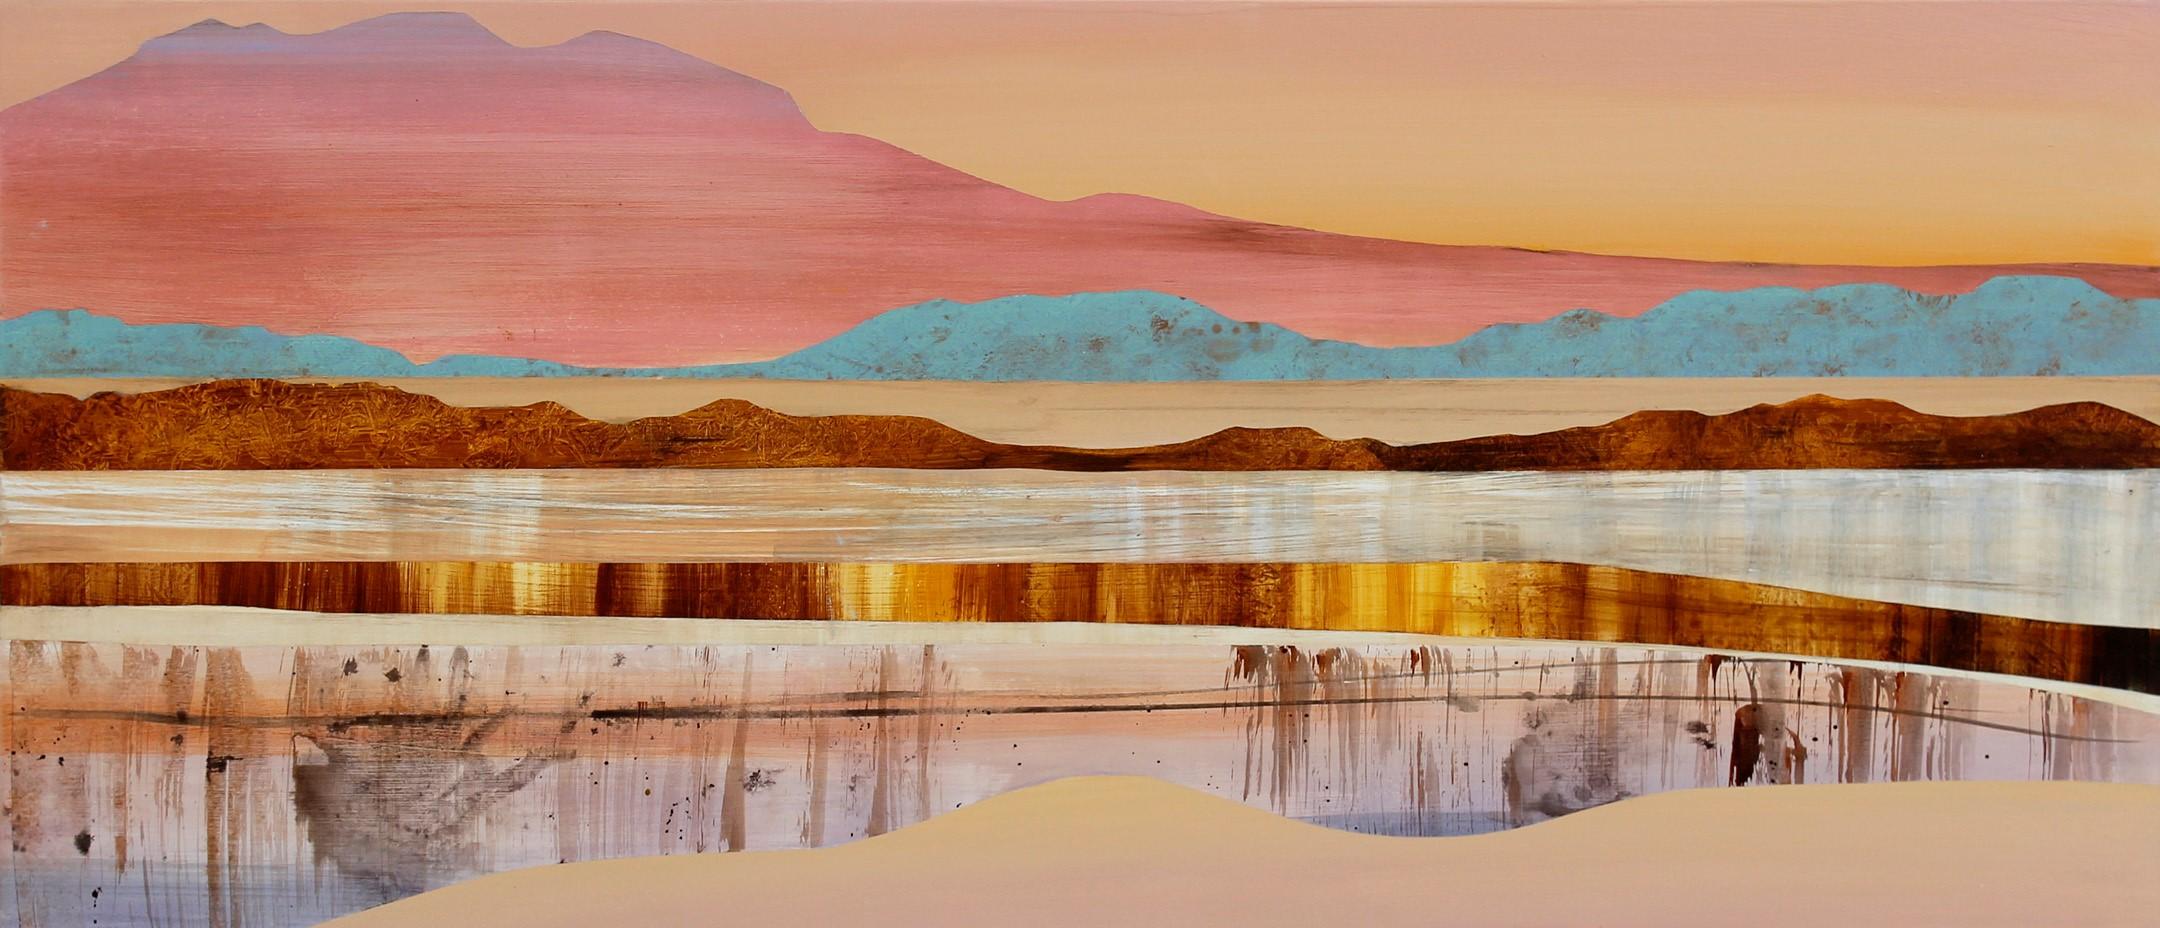 Sarah Winkler Abstract Painting - Vermillion Cliffs I